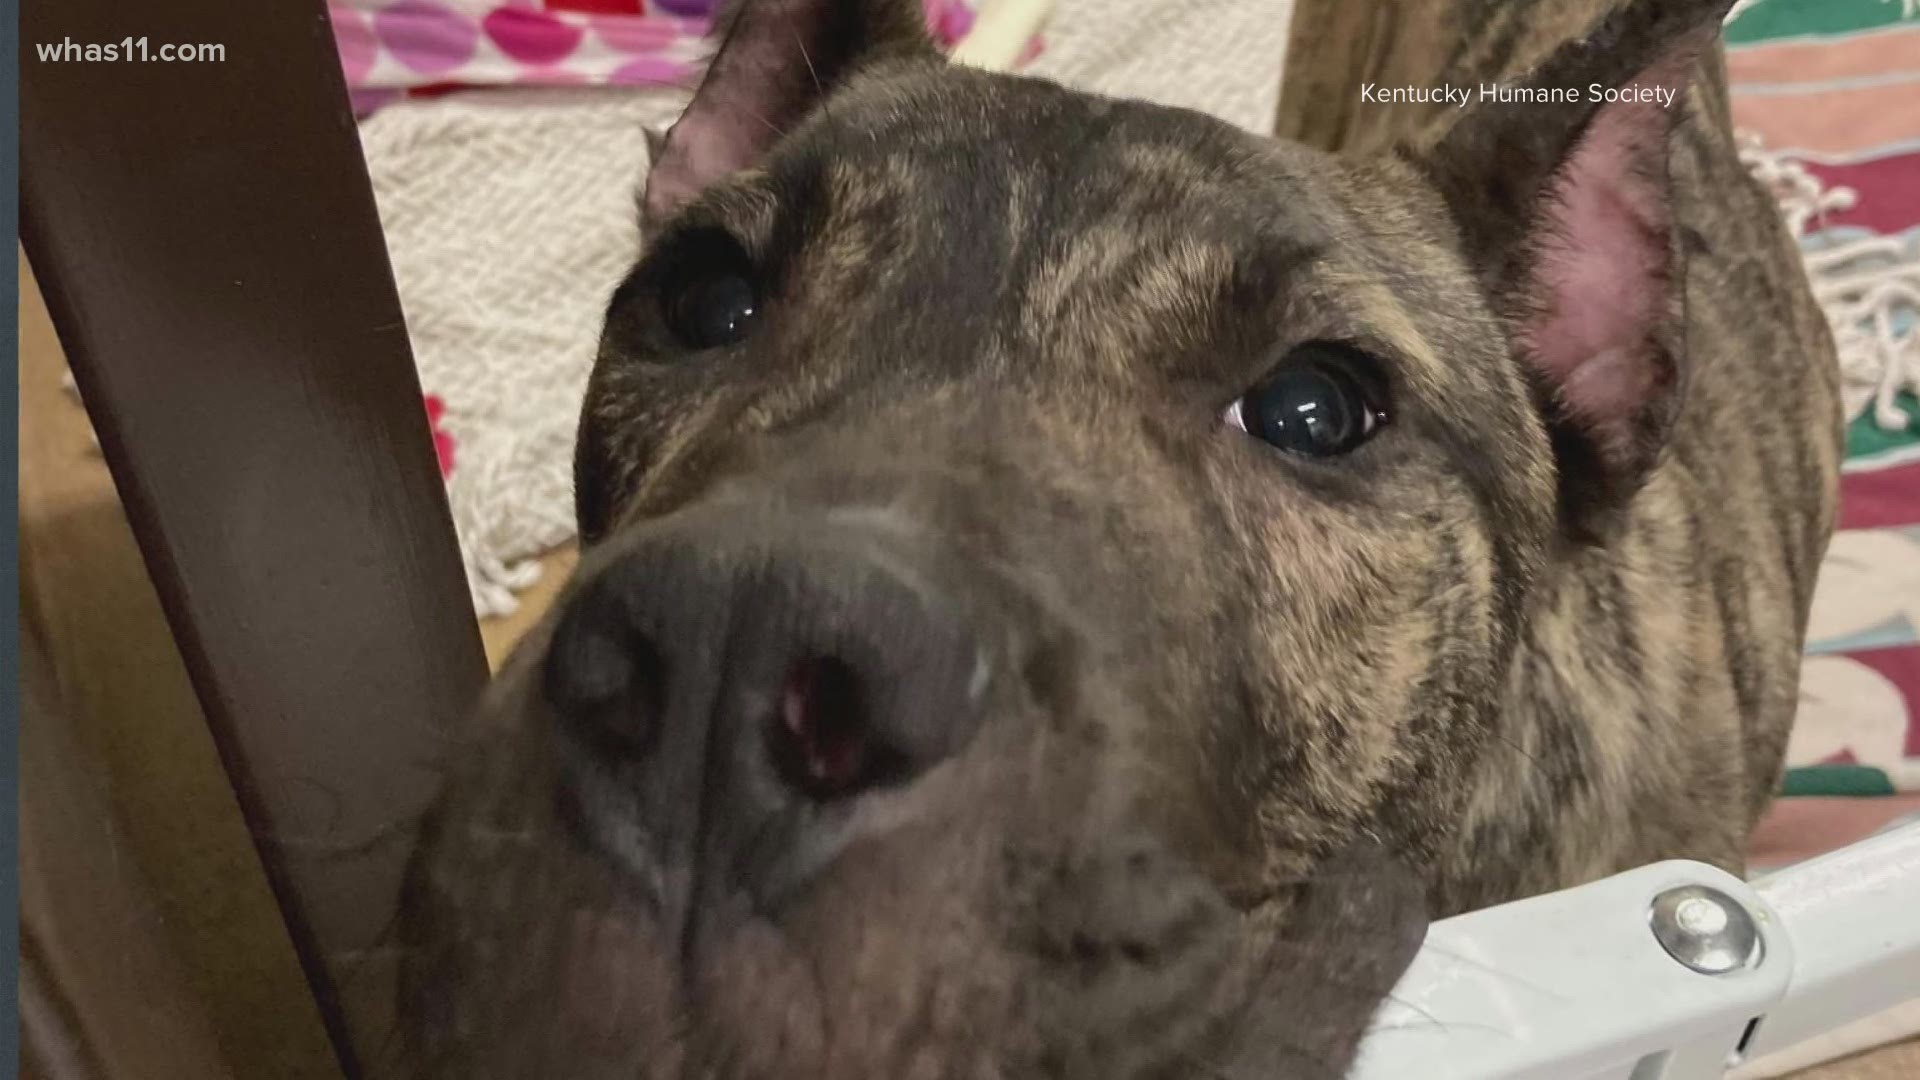 The 3-year-old dog was dropped off with little to no chance of survival. Now, he's surpassed all expectations.